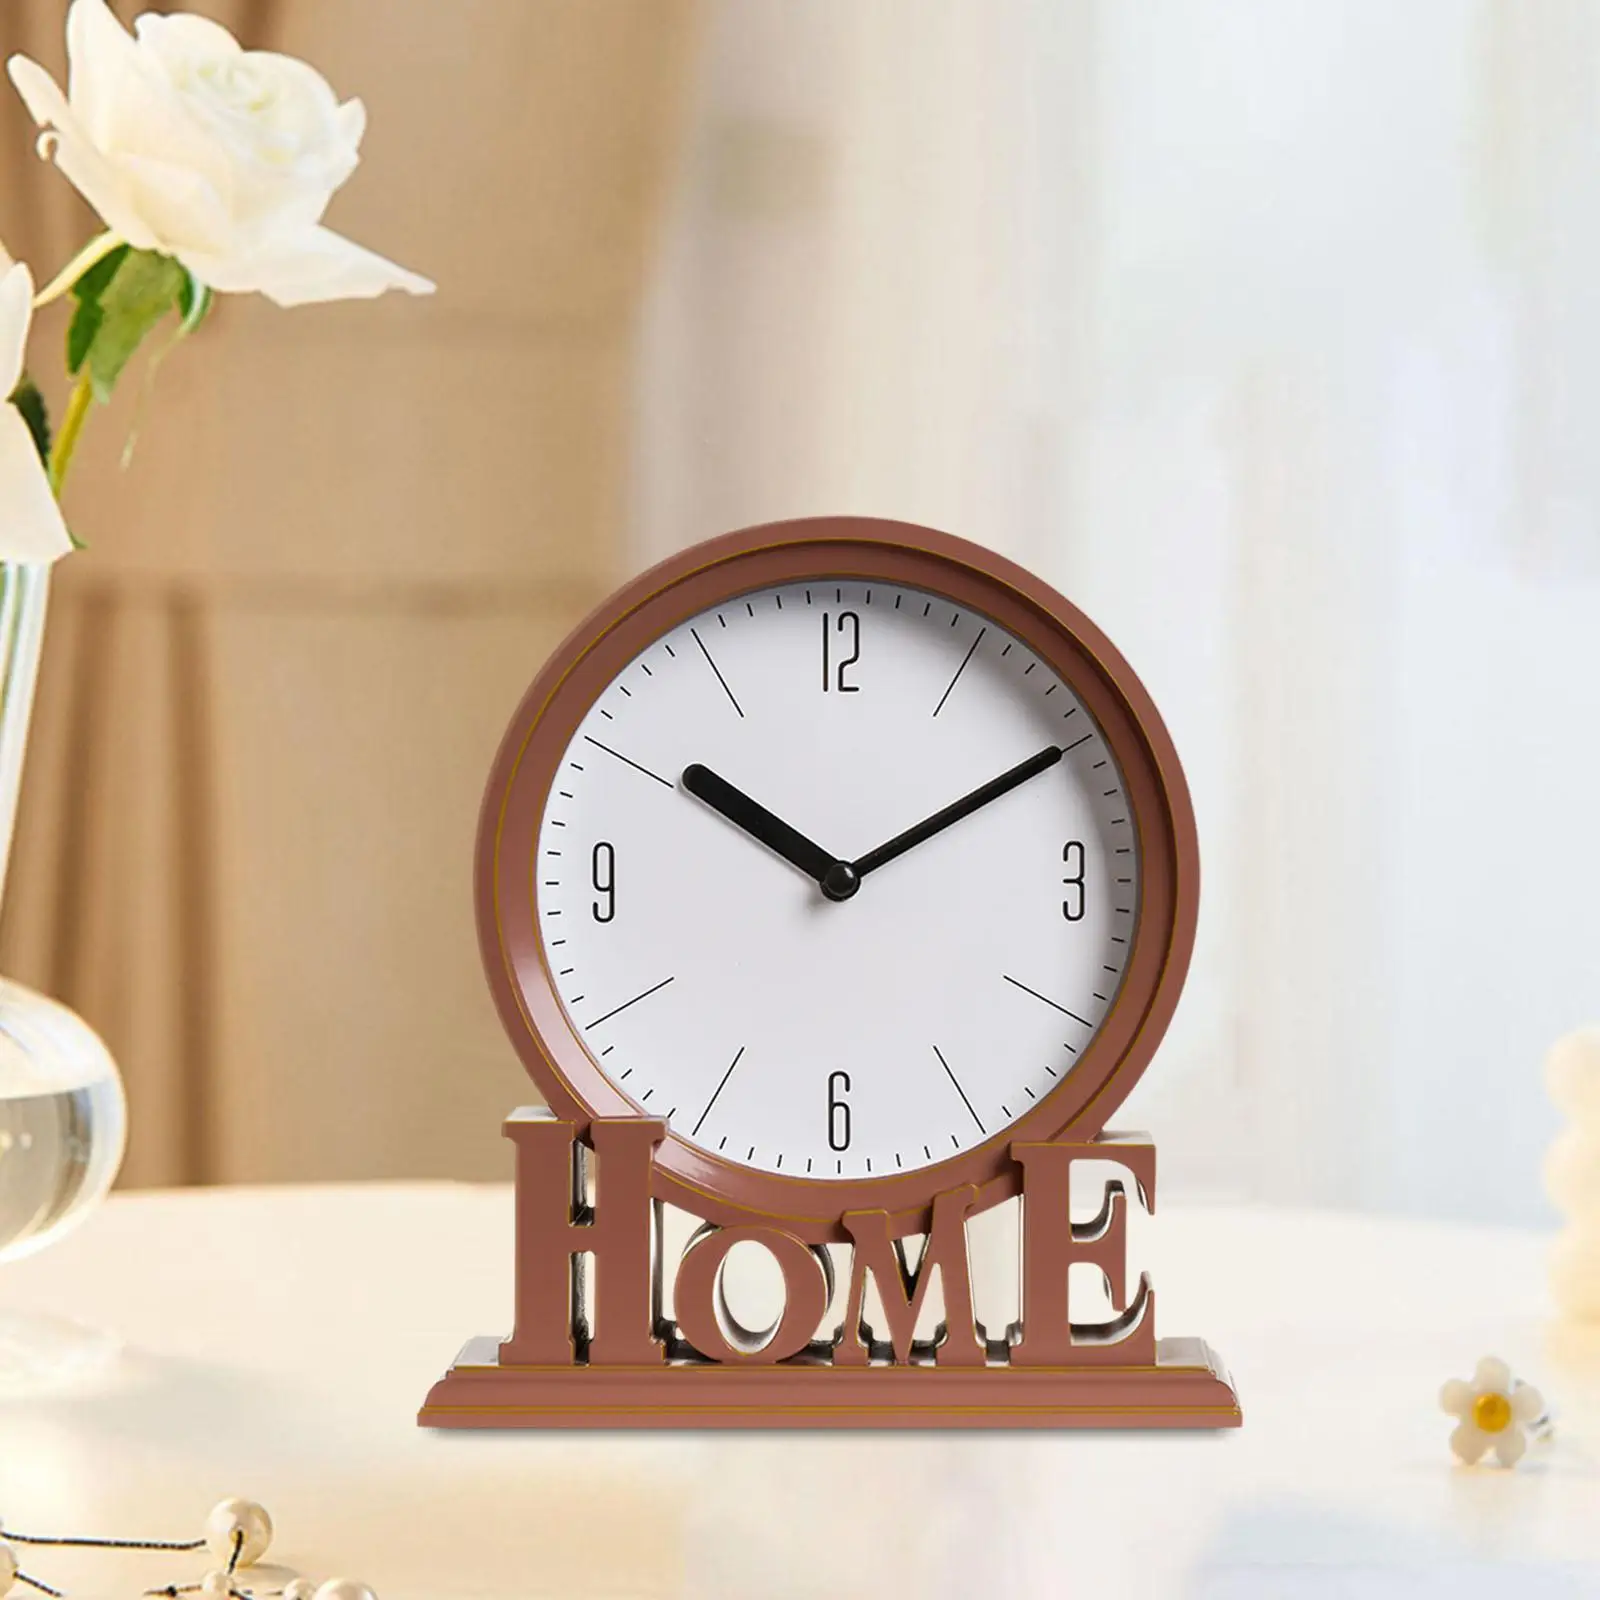 Vintage Style Desk Clock Non Ticking Decorative for Mantel Reading Mantel for